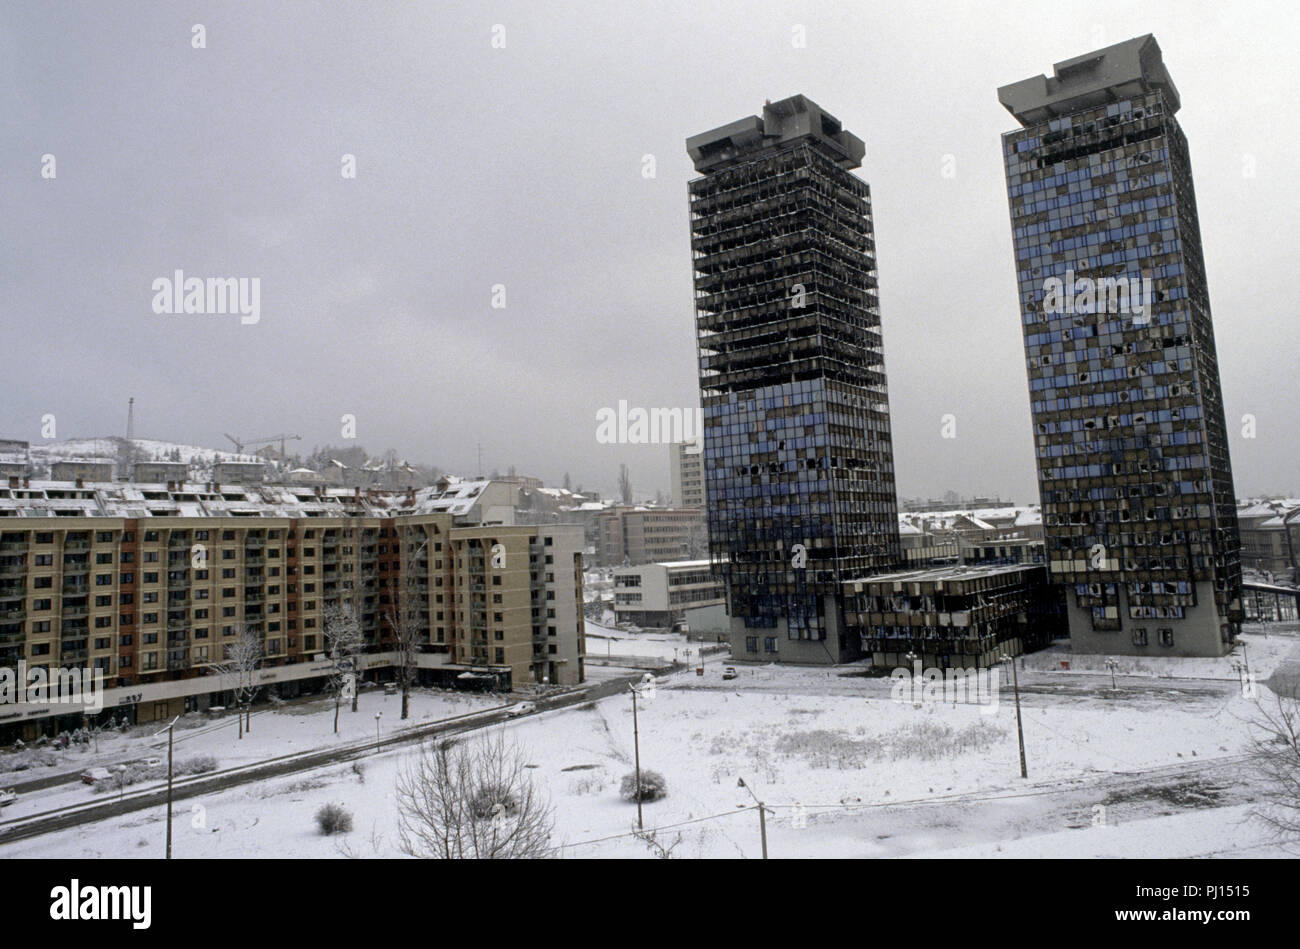 4th March 1993 During the Siege of Sarajevo: the war-damaged twin Unis Towers. The towers were built in the 1980s and were nicknamed 'Momo' and 'Uzeir', a Serb and a Bosniak, after characters in a radio comedy. Stock Photo